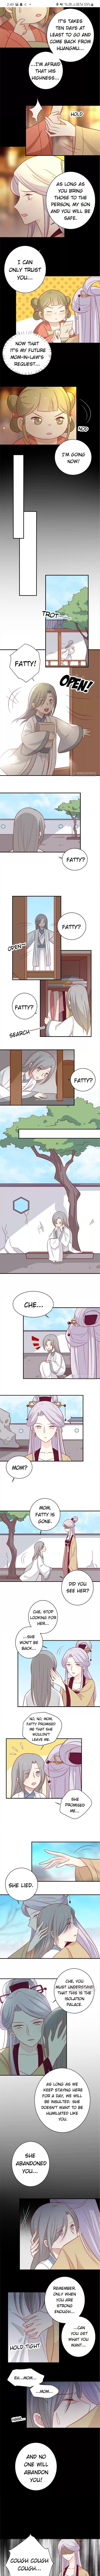 His Highness, Don't Leave! I Will Lose Weight For You! - Page 2